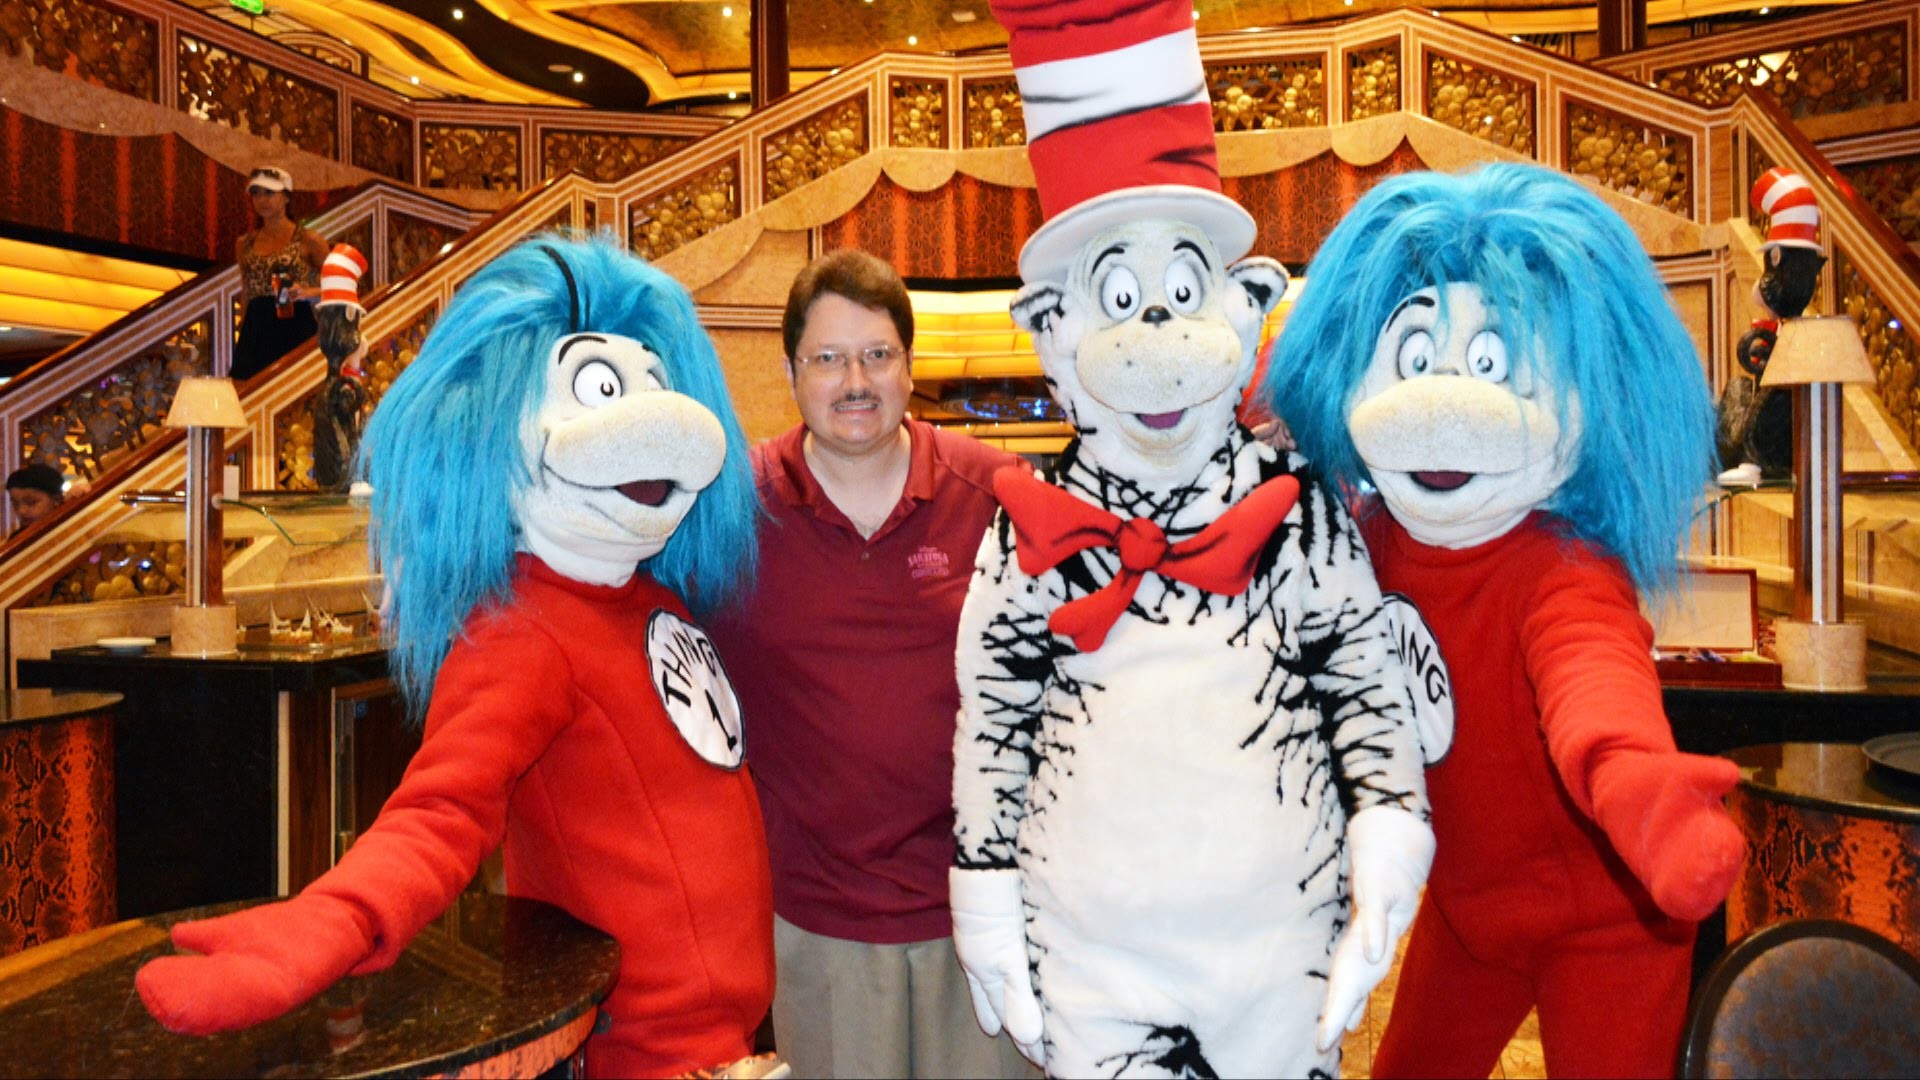 1920x1080 Green Eggs and Ham Breakfast with The Cat in the Hat & Dr. Seuss Friends on  Carnival Freedom Cruise - YouTube